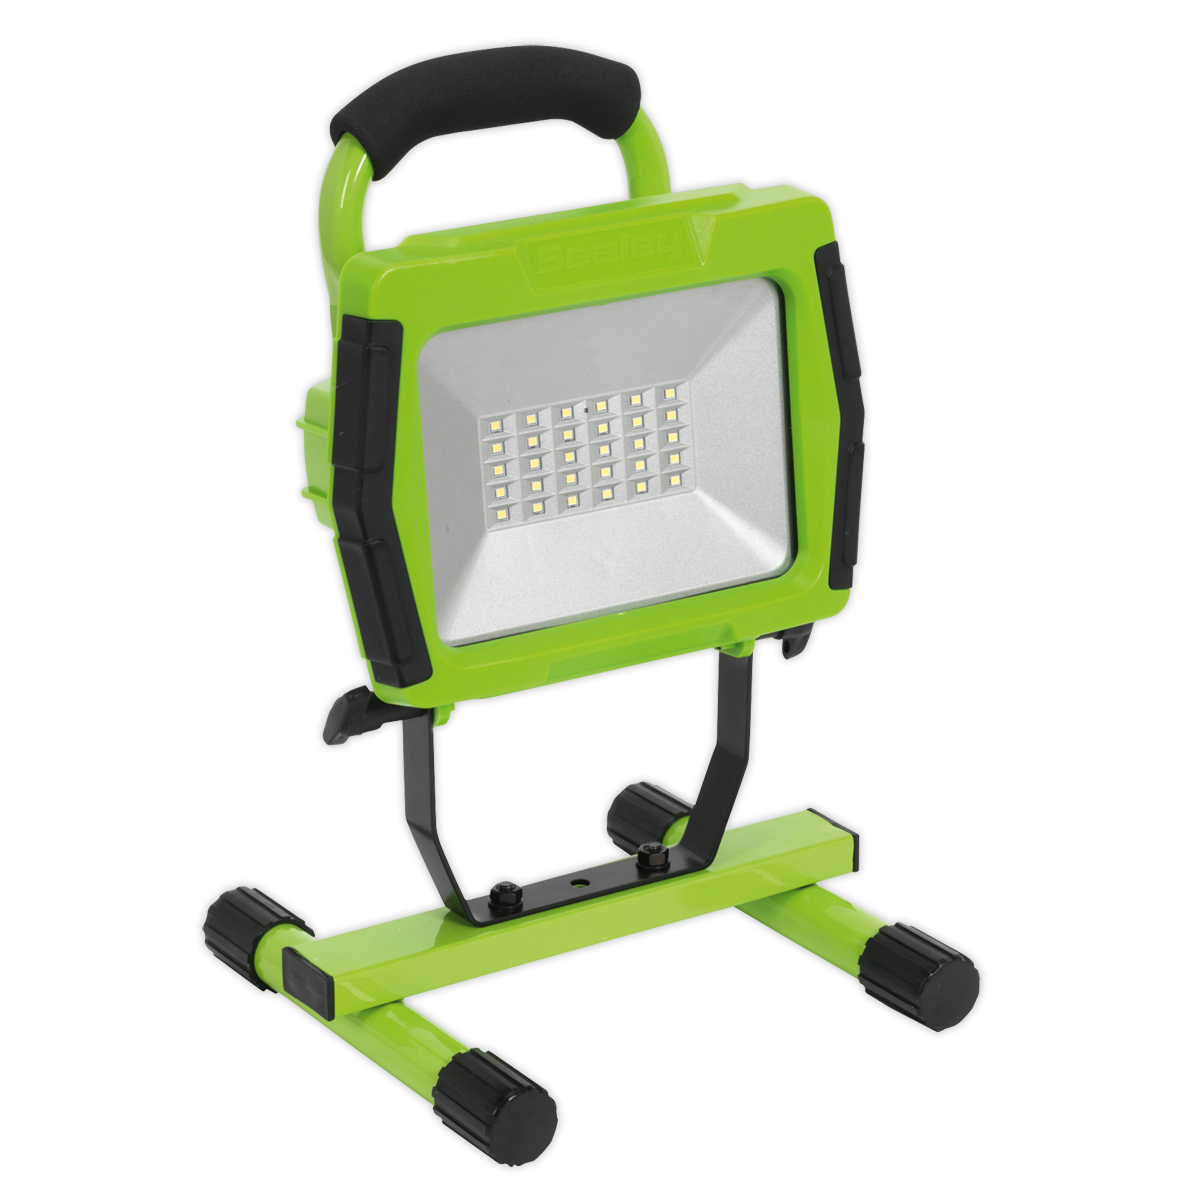 Sealey Rechargeable Portable Floodlight 10W SMD LED Lithium-ion